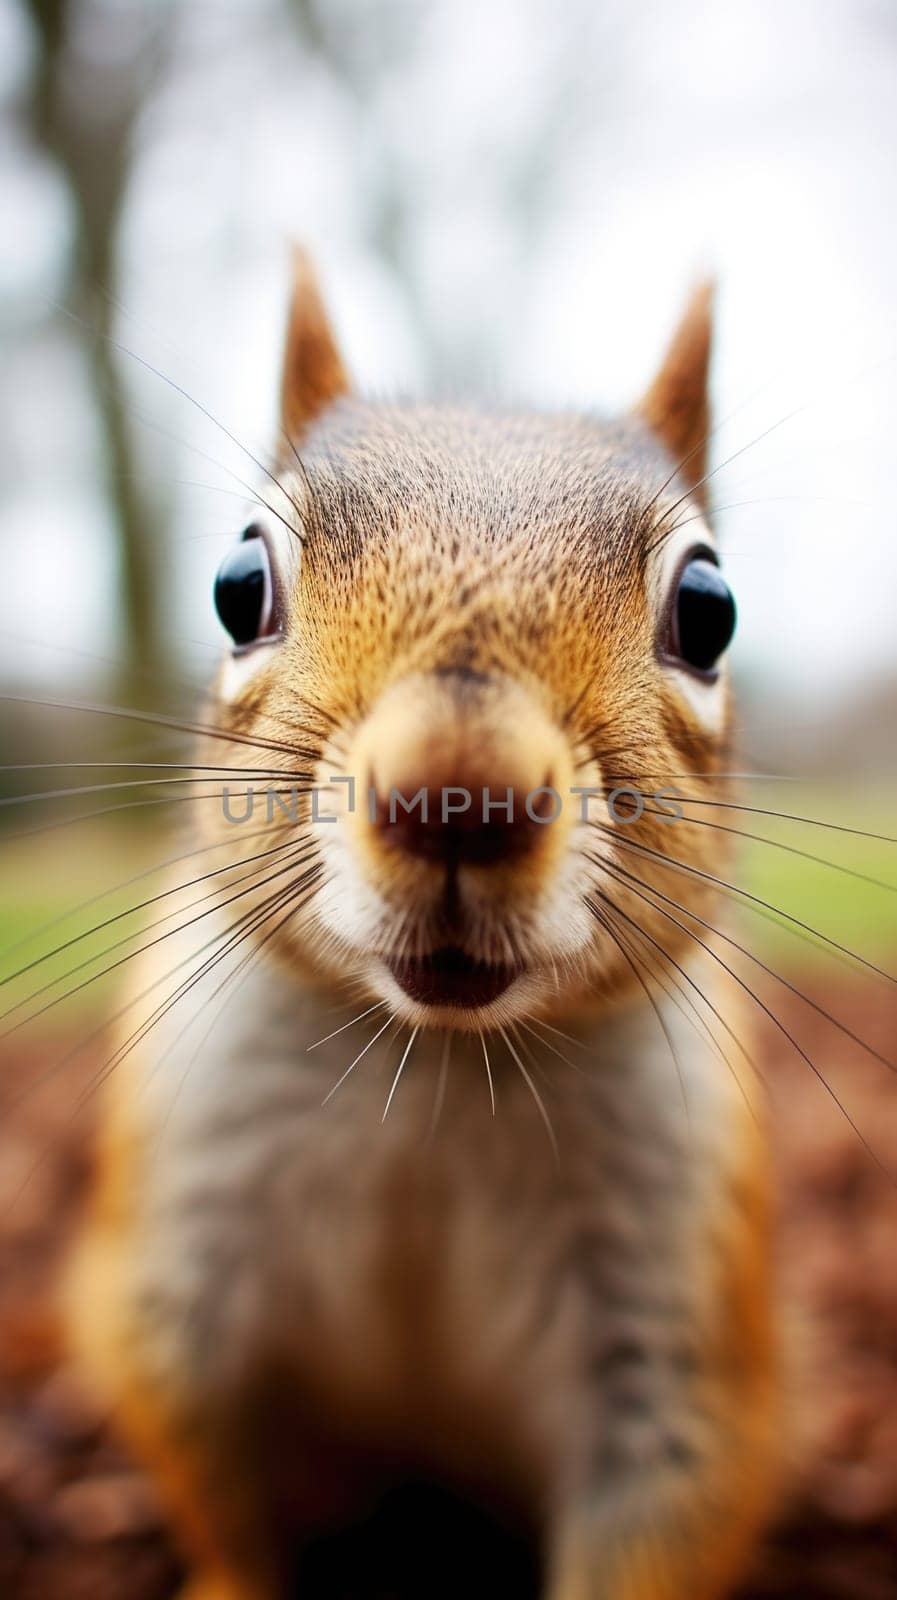 A close up of a squirrel looking at the camera